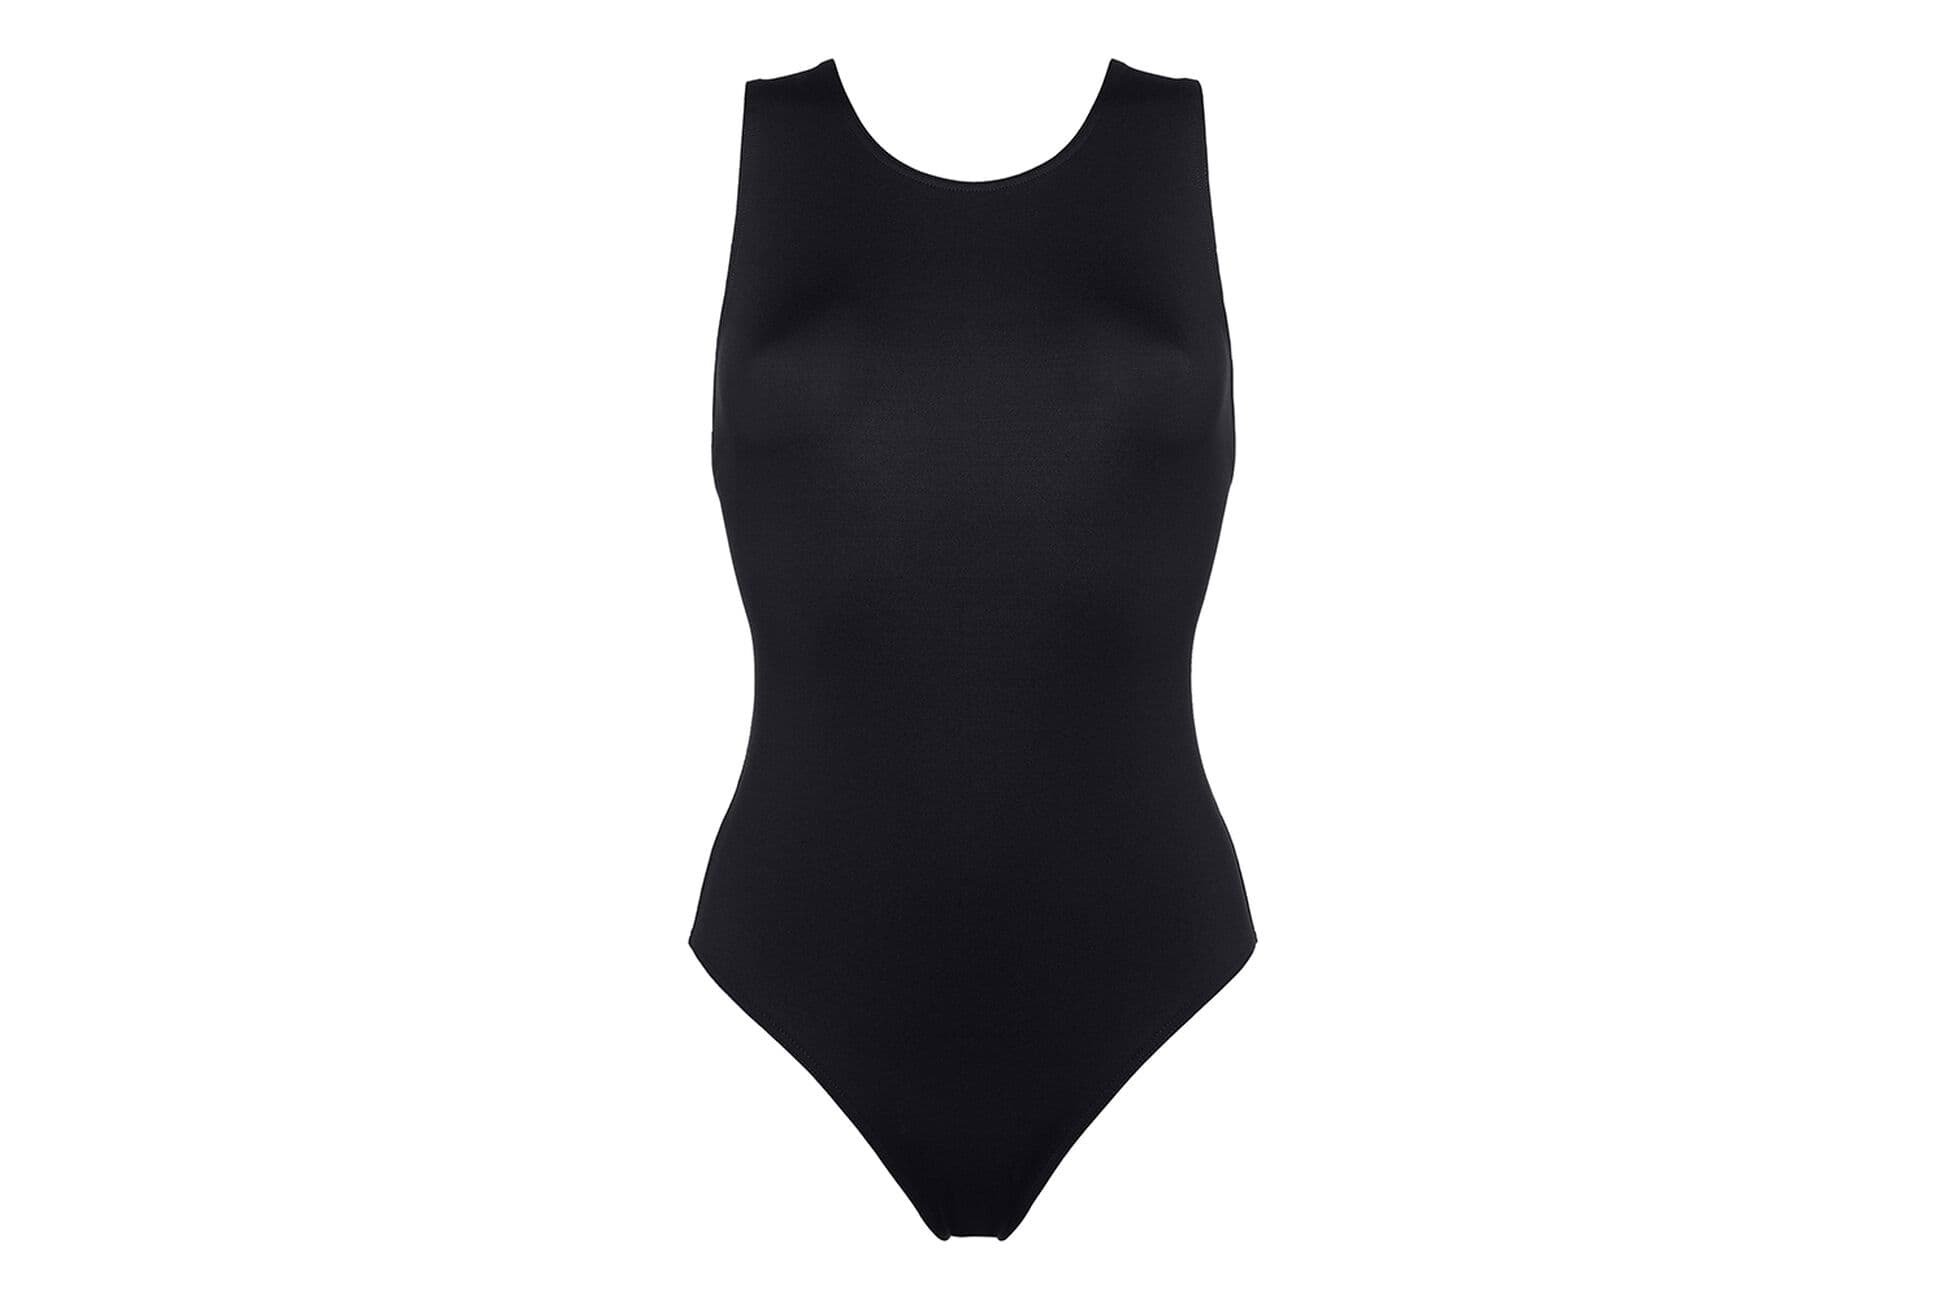 Dance Sophisticated one-piece standard view �